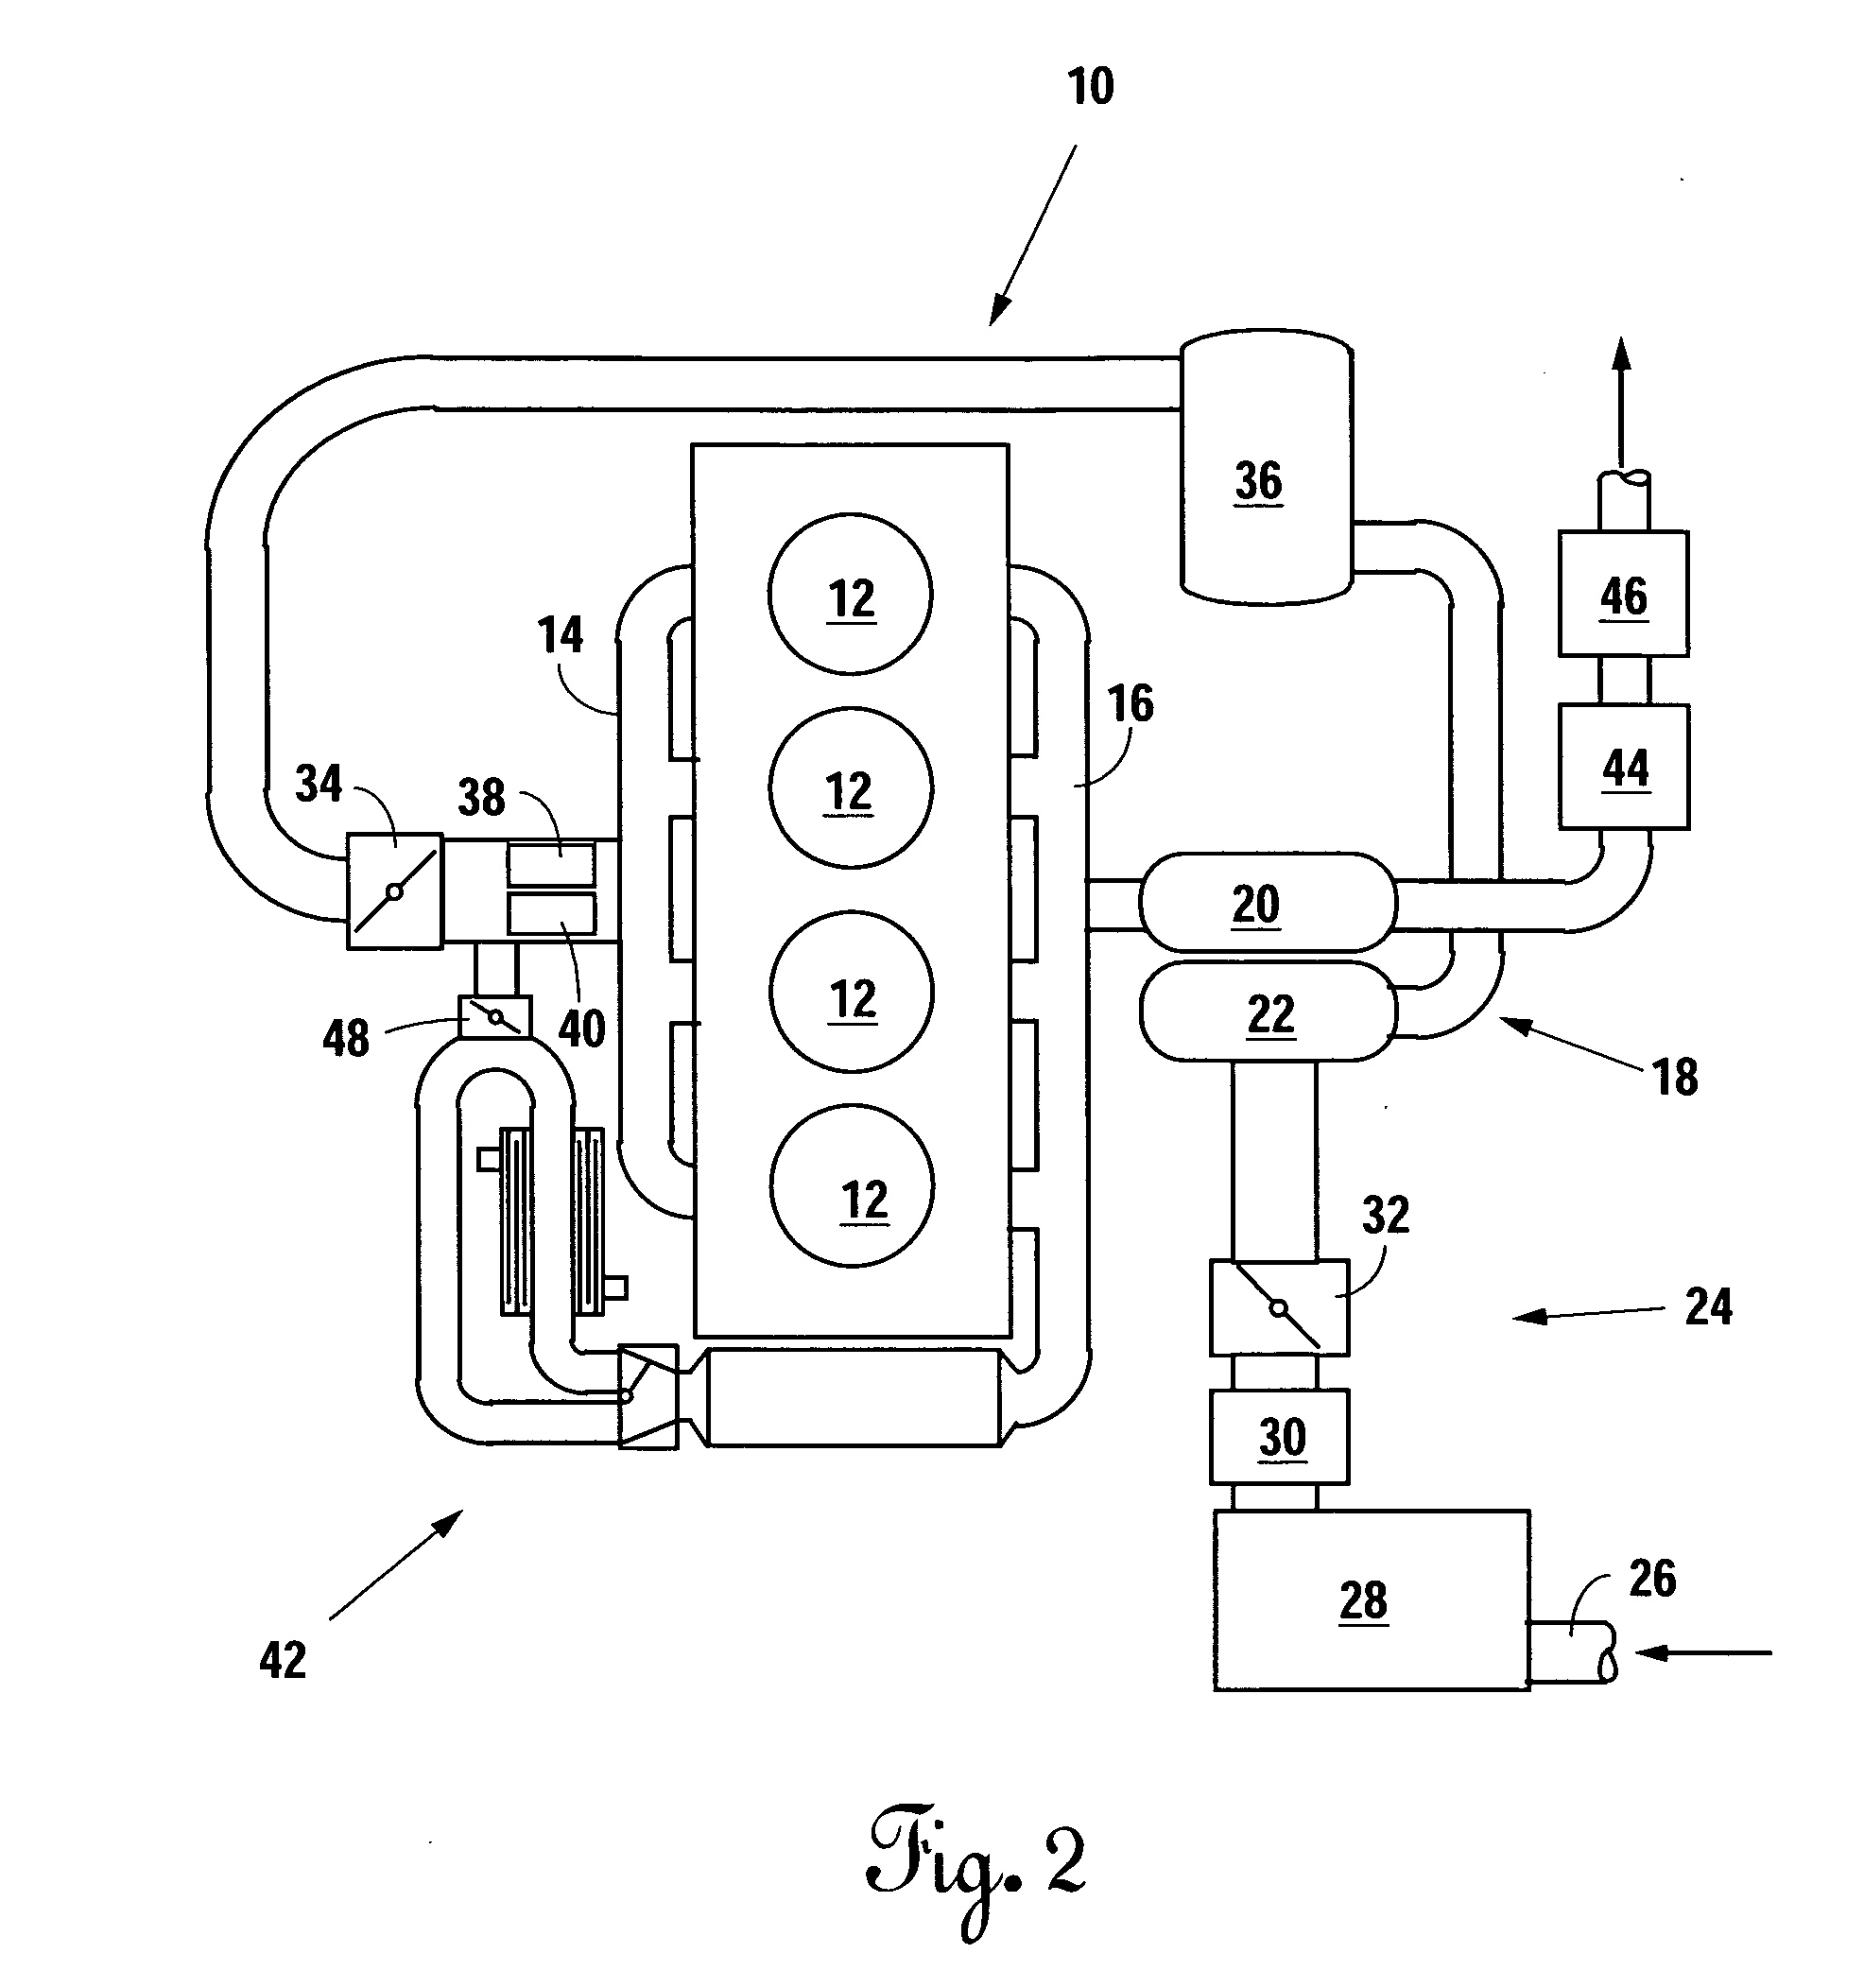 Method for operating a diesel engine in a homogeneous charge compression ignition combustion mode under idle and light-load operating conditions